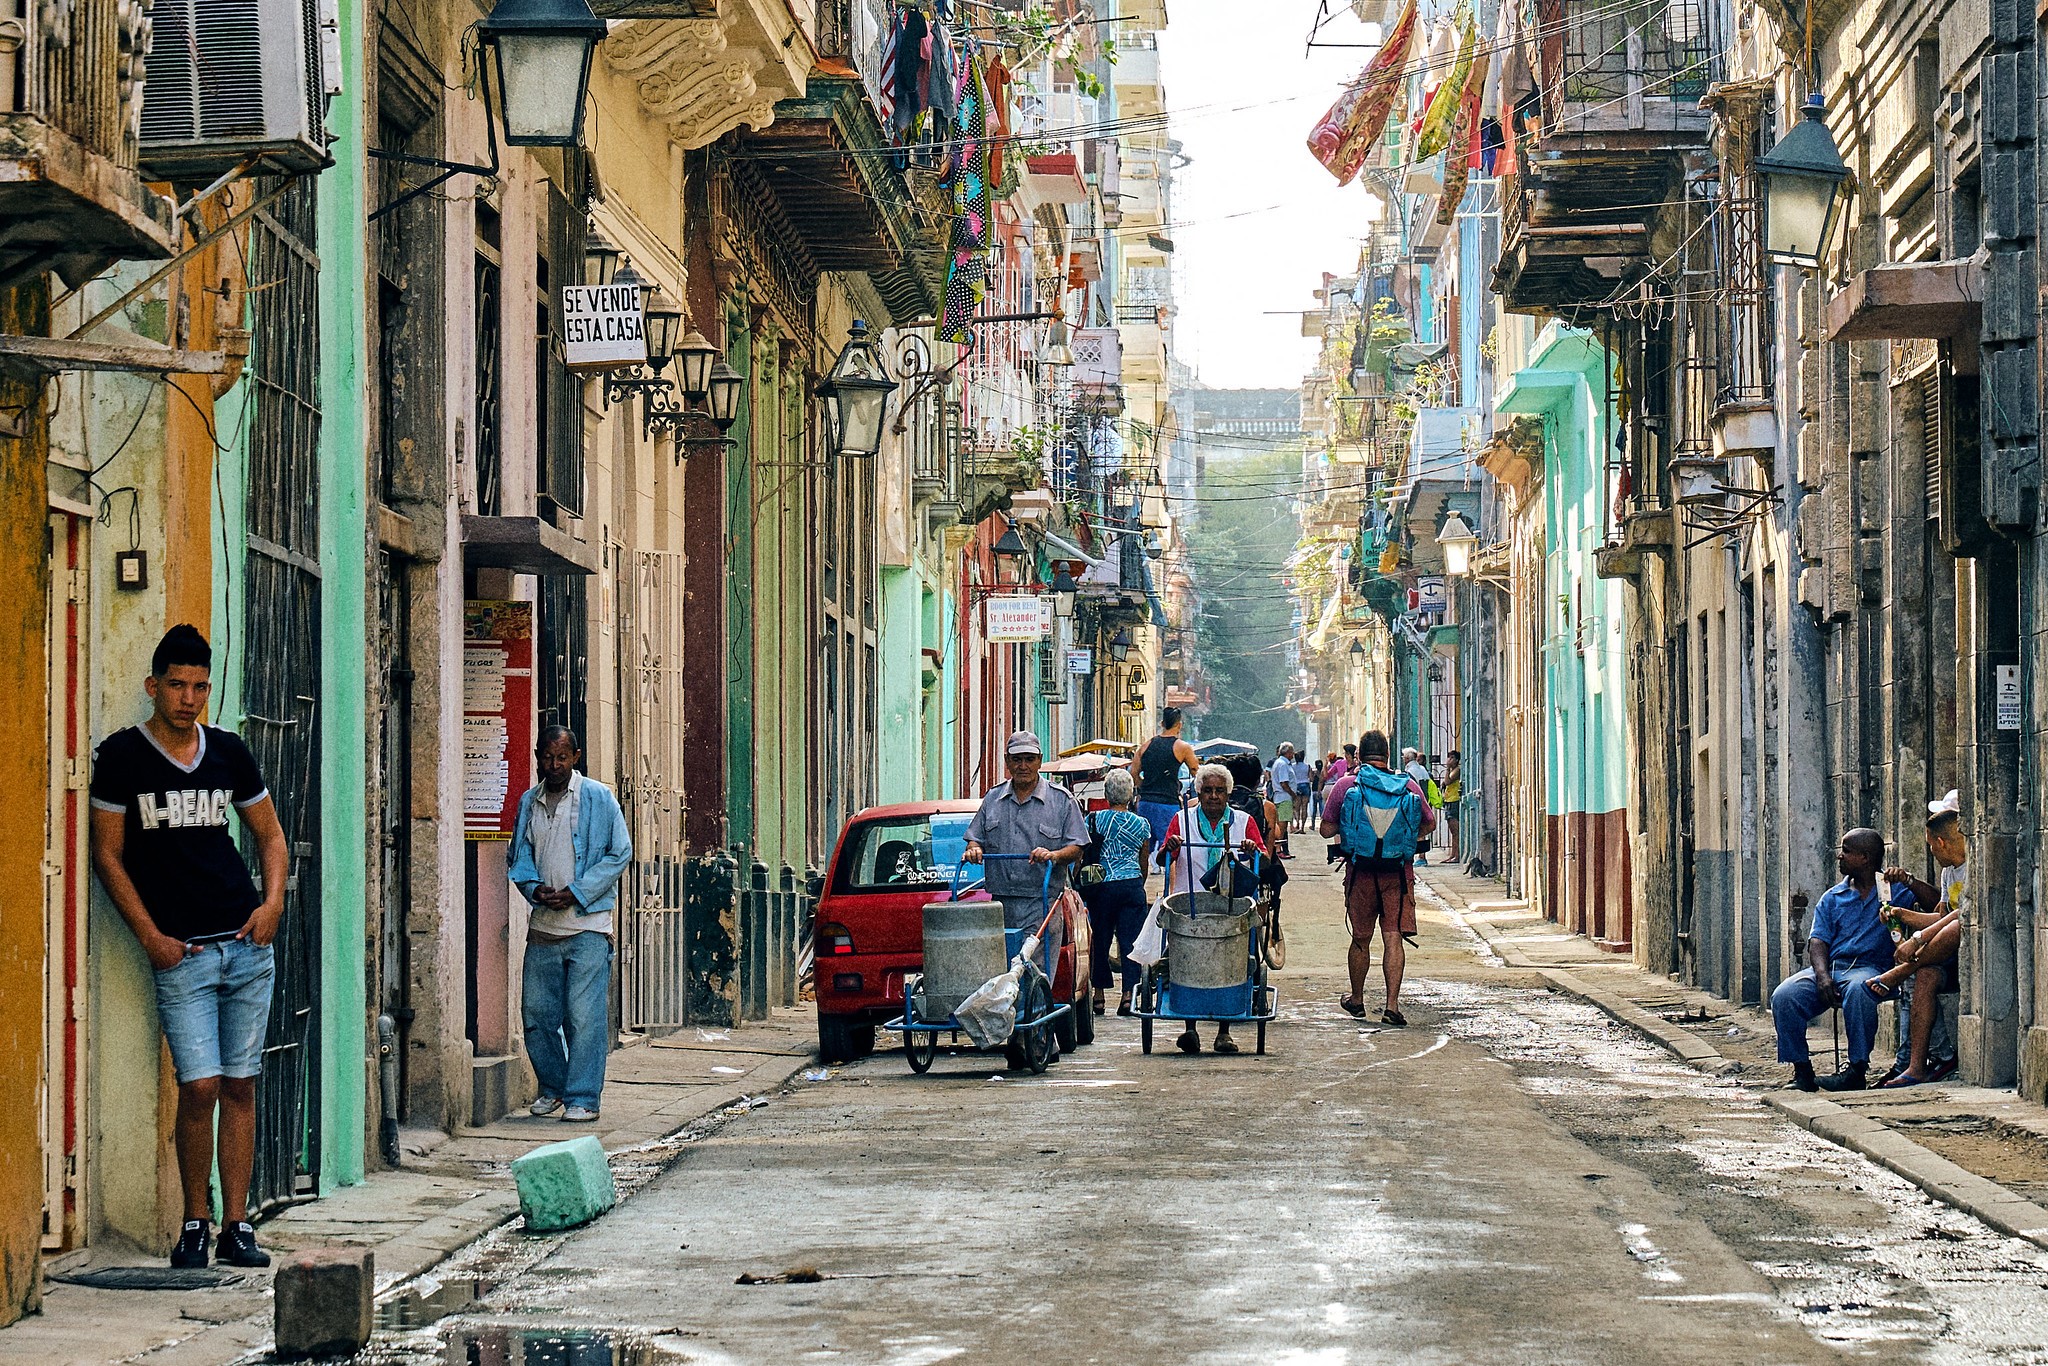 10 Facts About Sanitation in Cuba